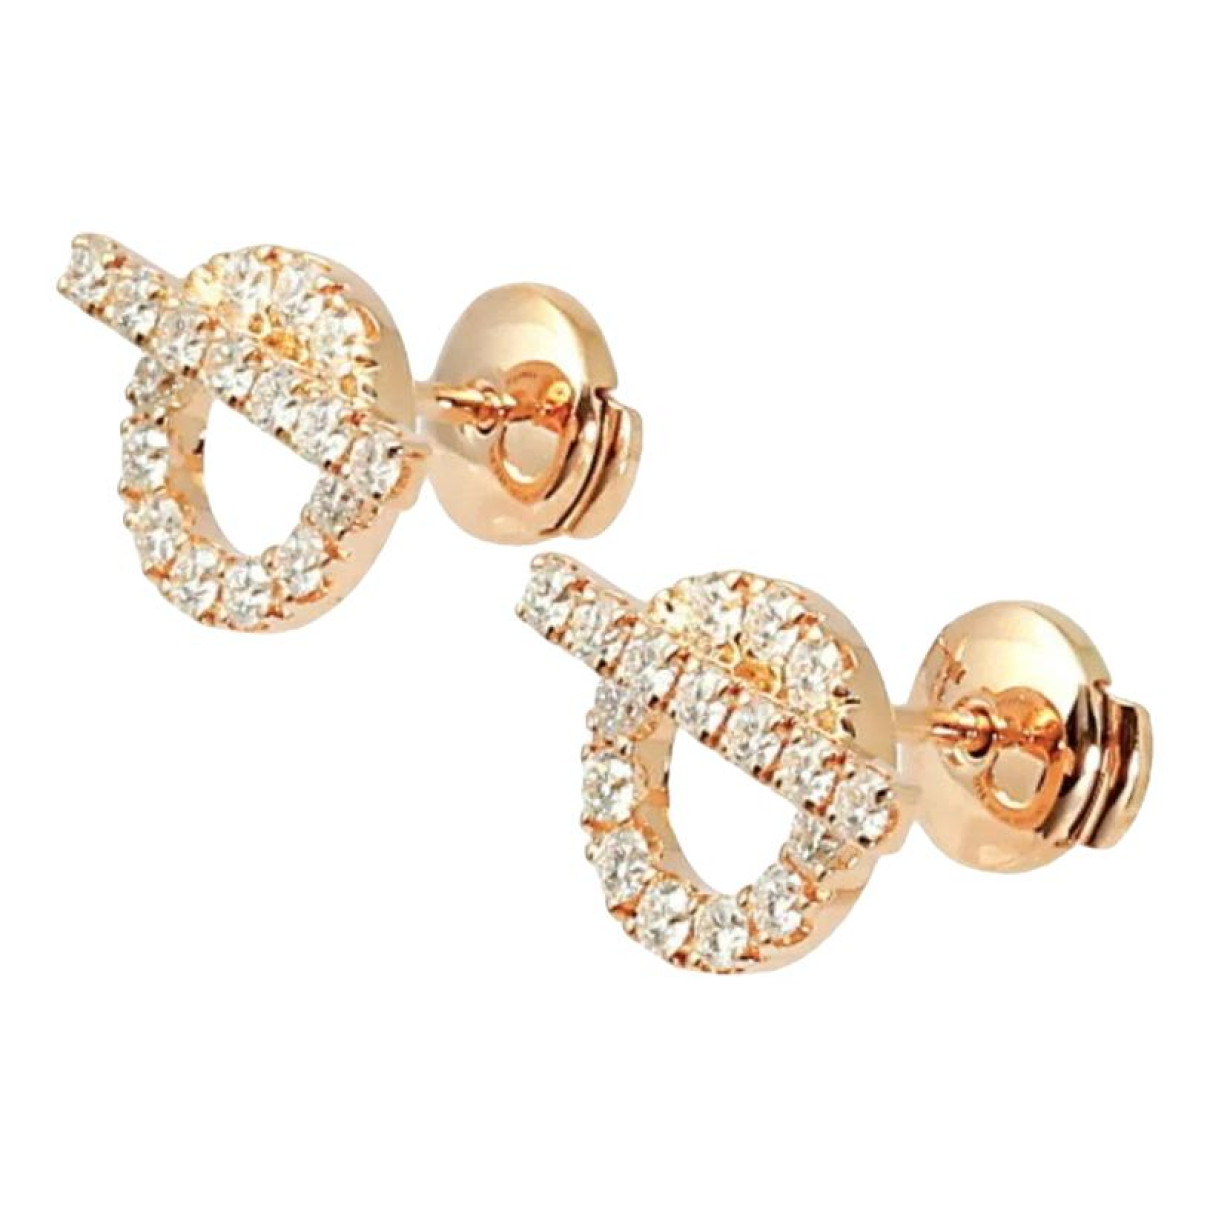 jewellery Hermès earrings Finesse for Female Pink gold. Used condition